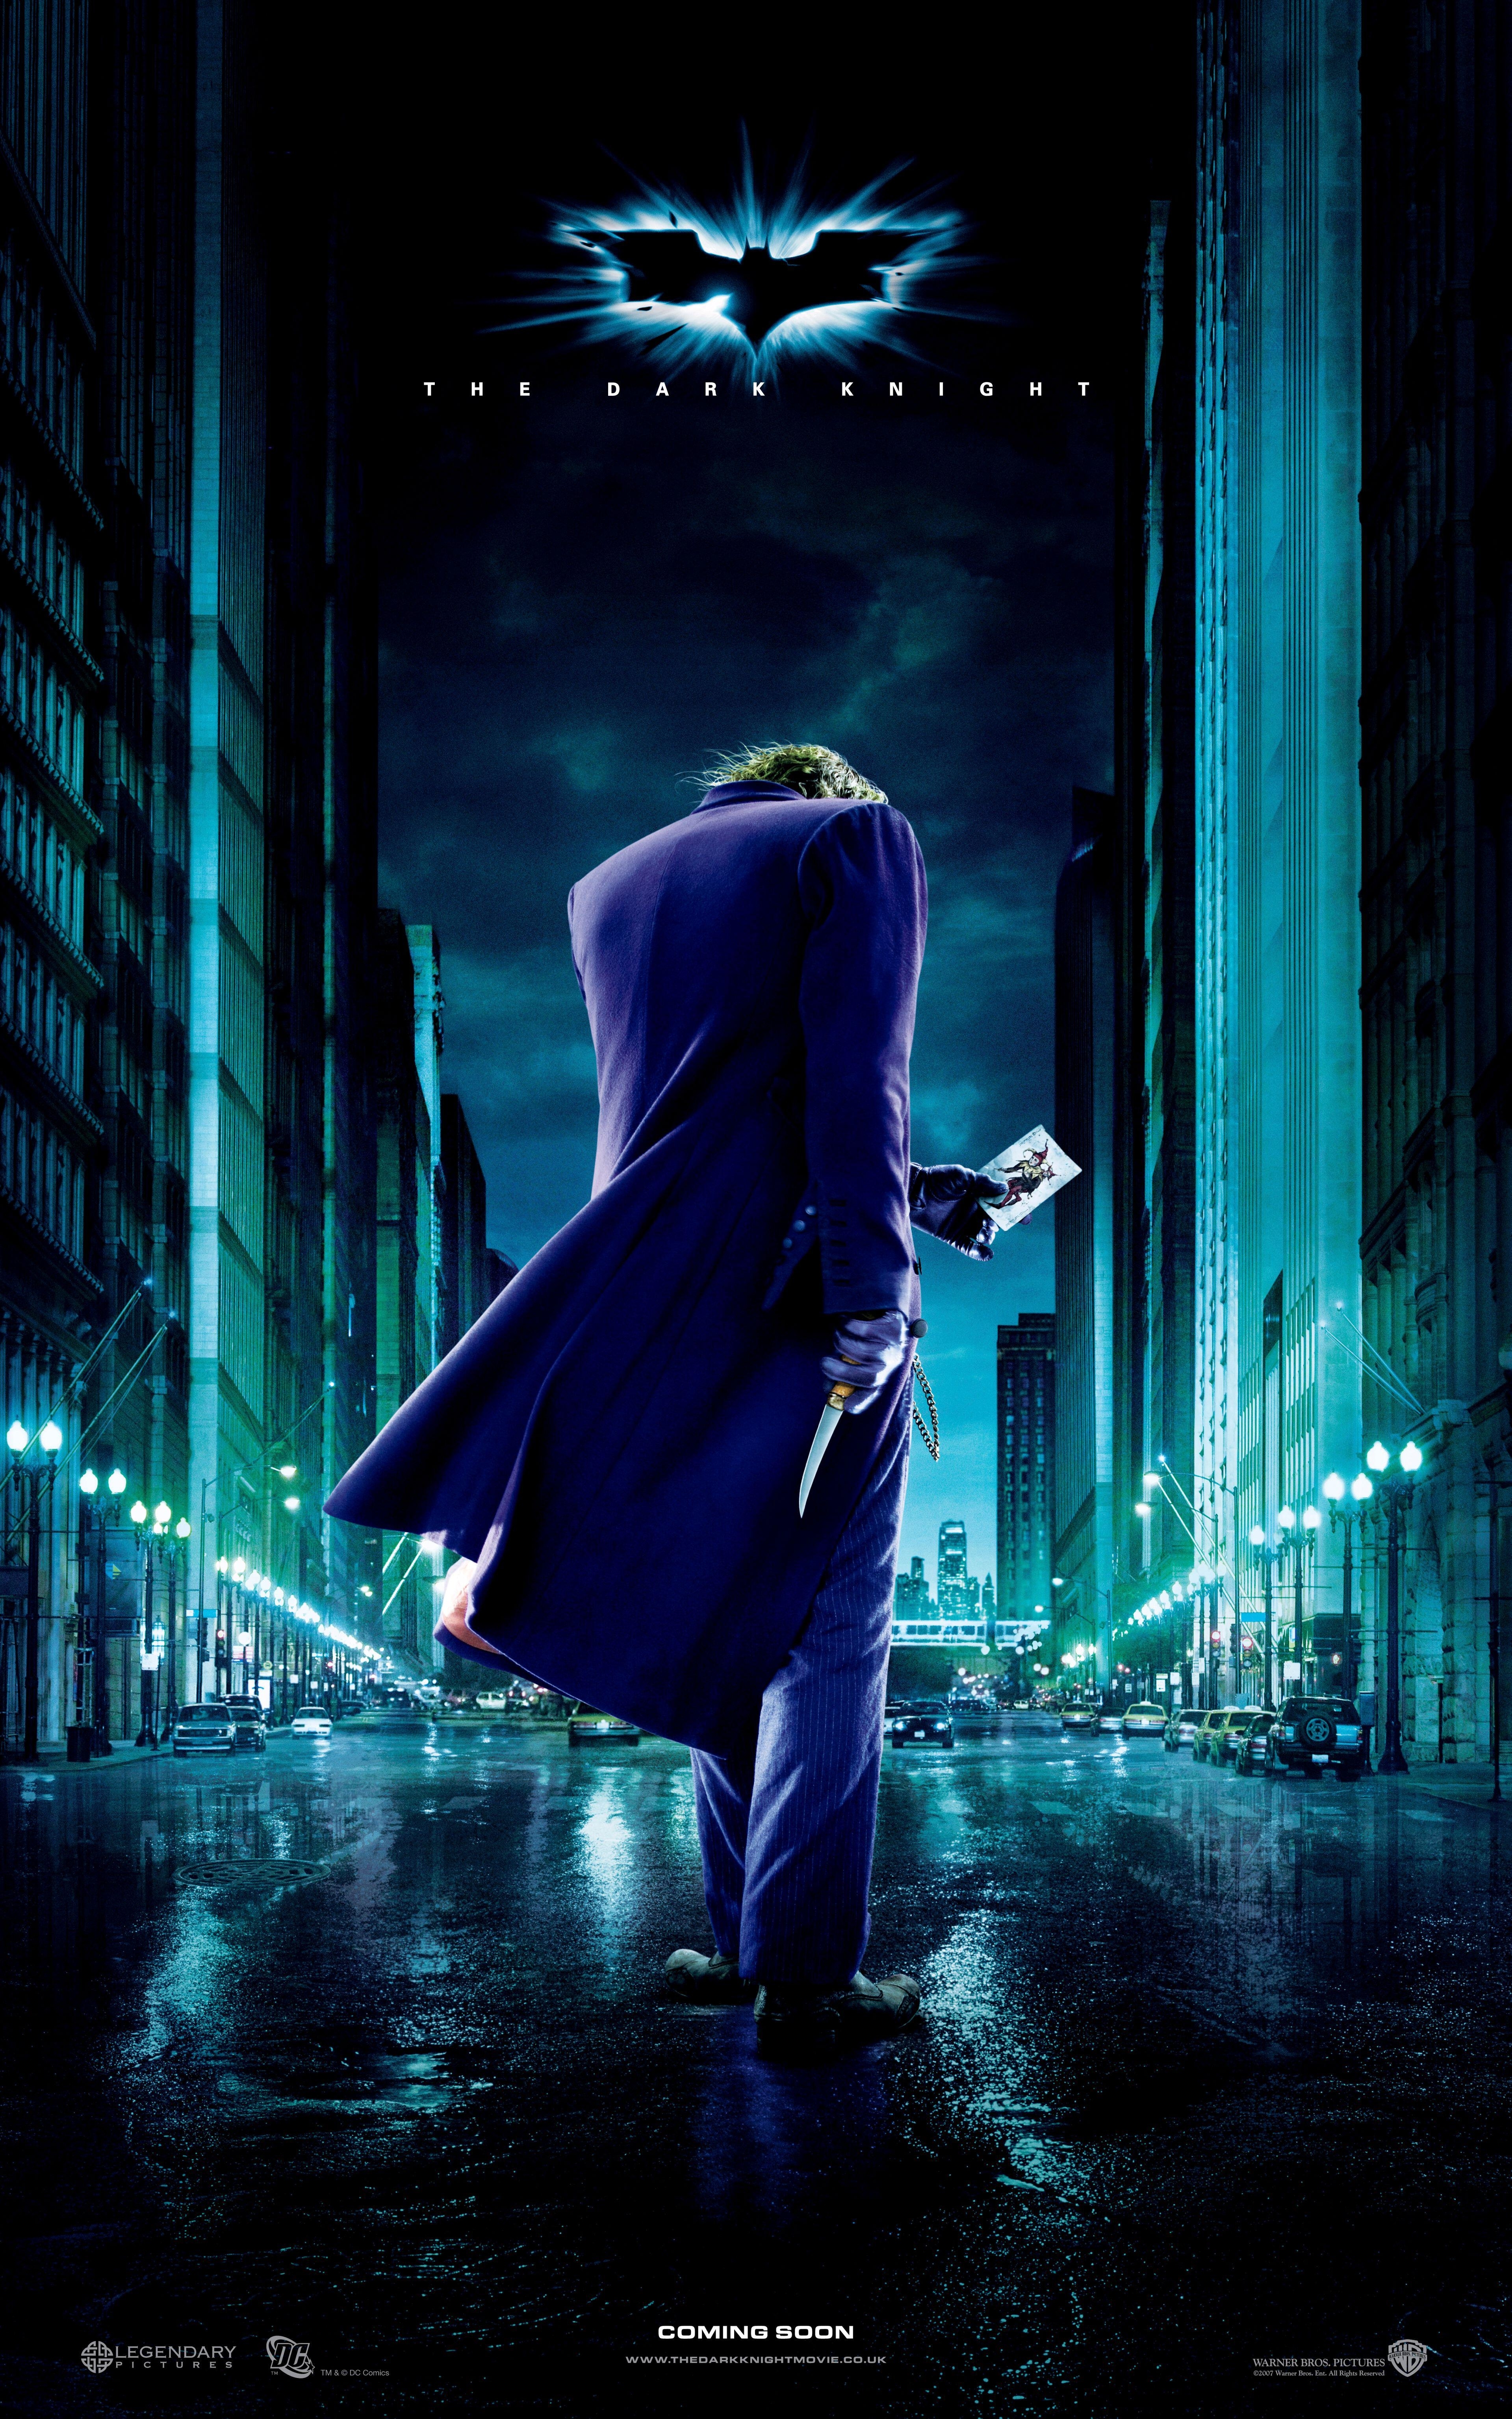 The Joker stands with his back to us on The Dark Knight movie poster.